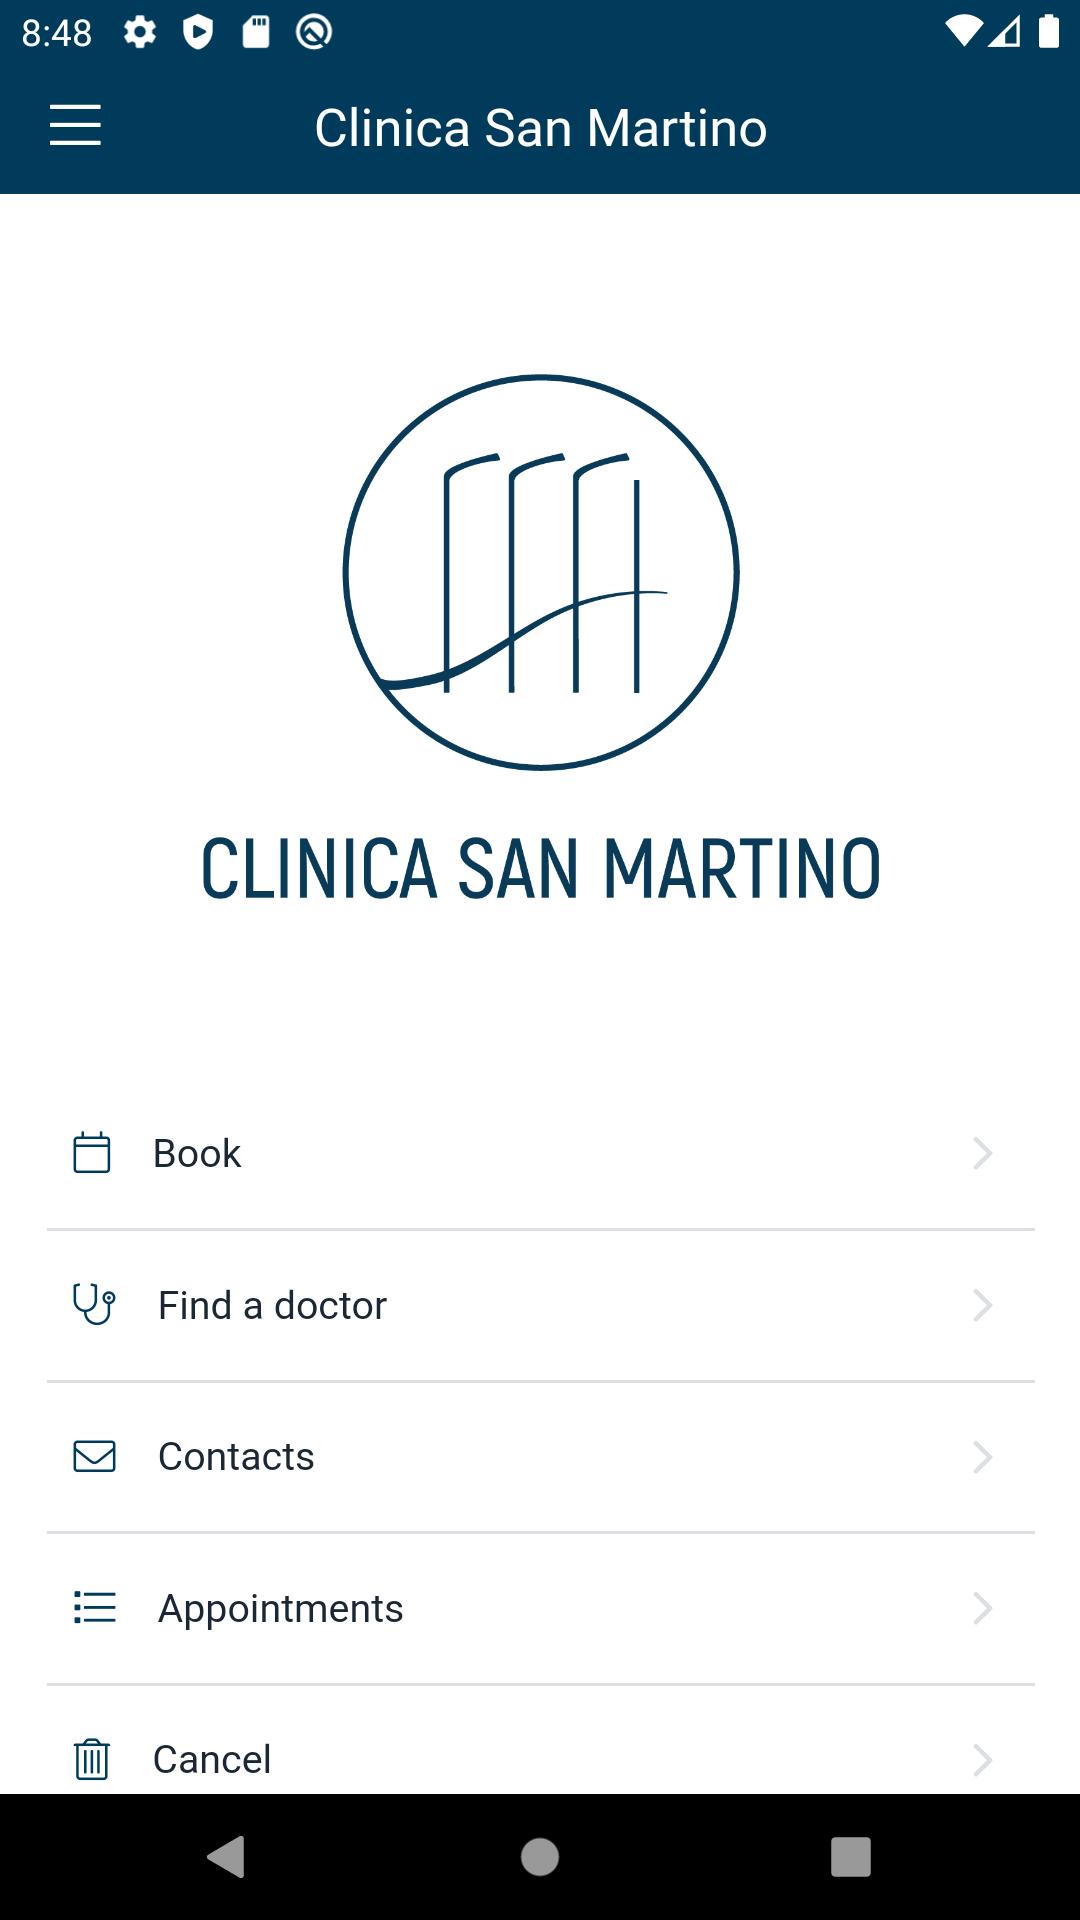 CSM Clinica San Martino for Android - APK Download